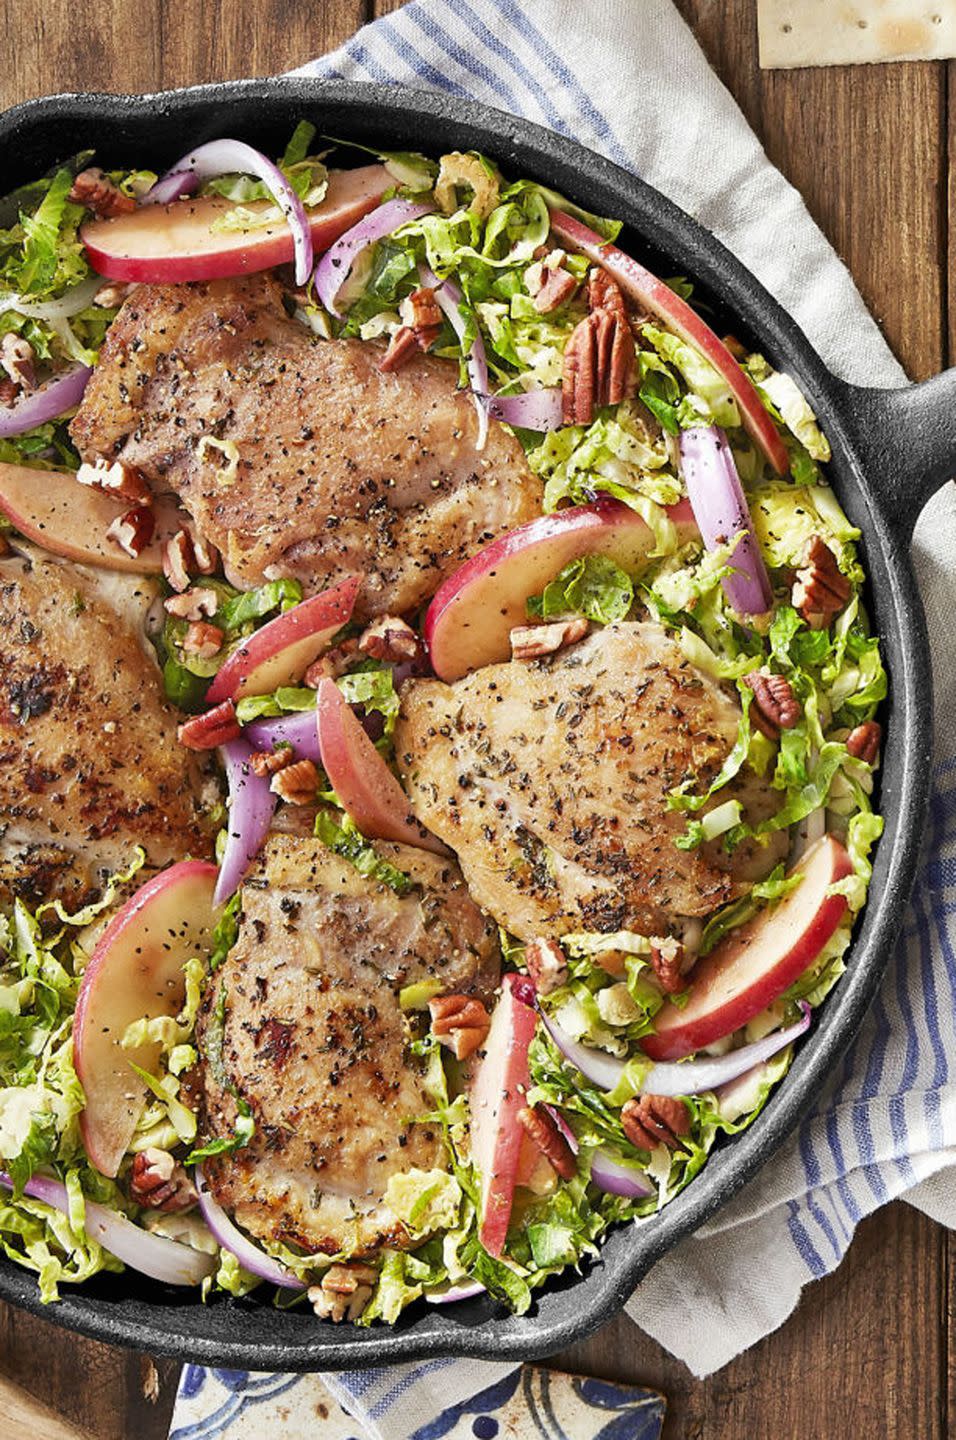 Skillet Chicken With Brussels Sprouts and Apples